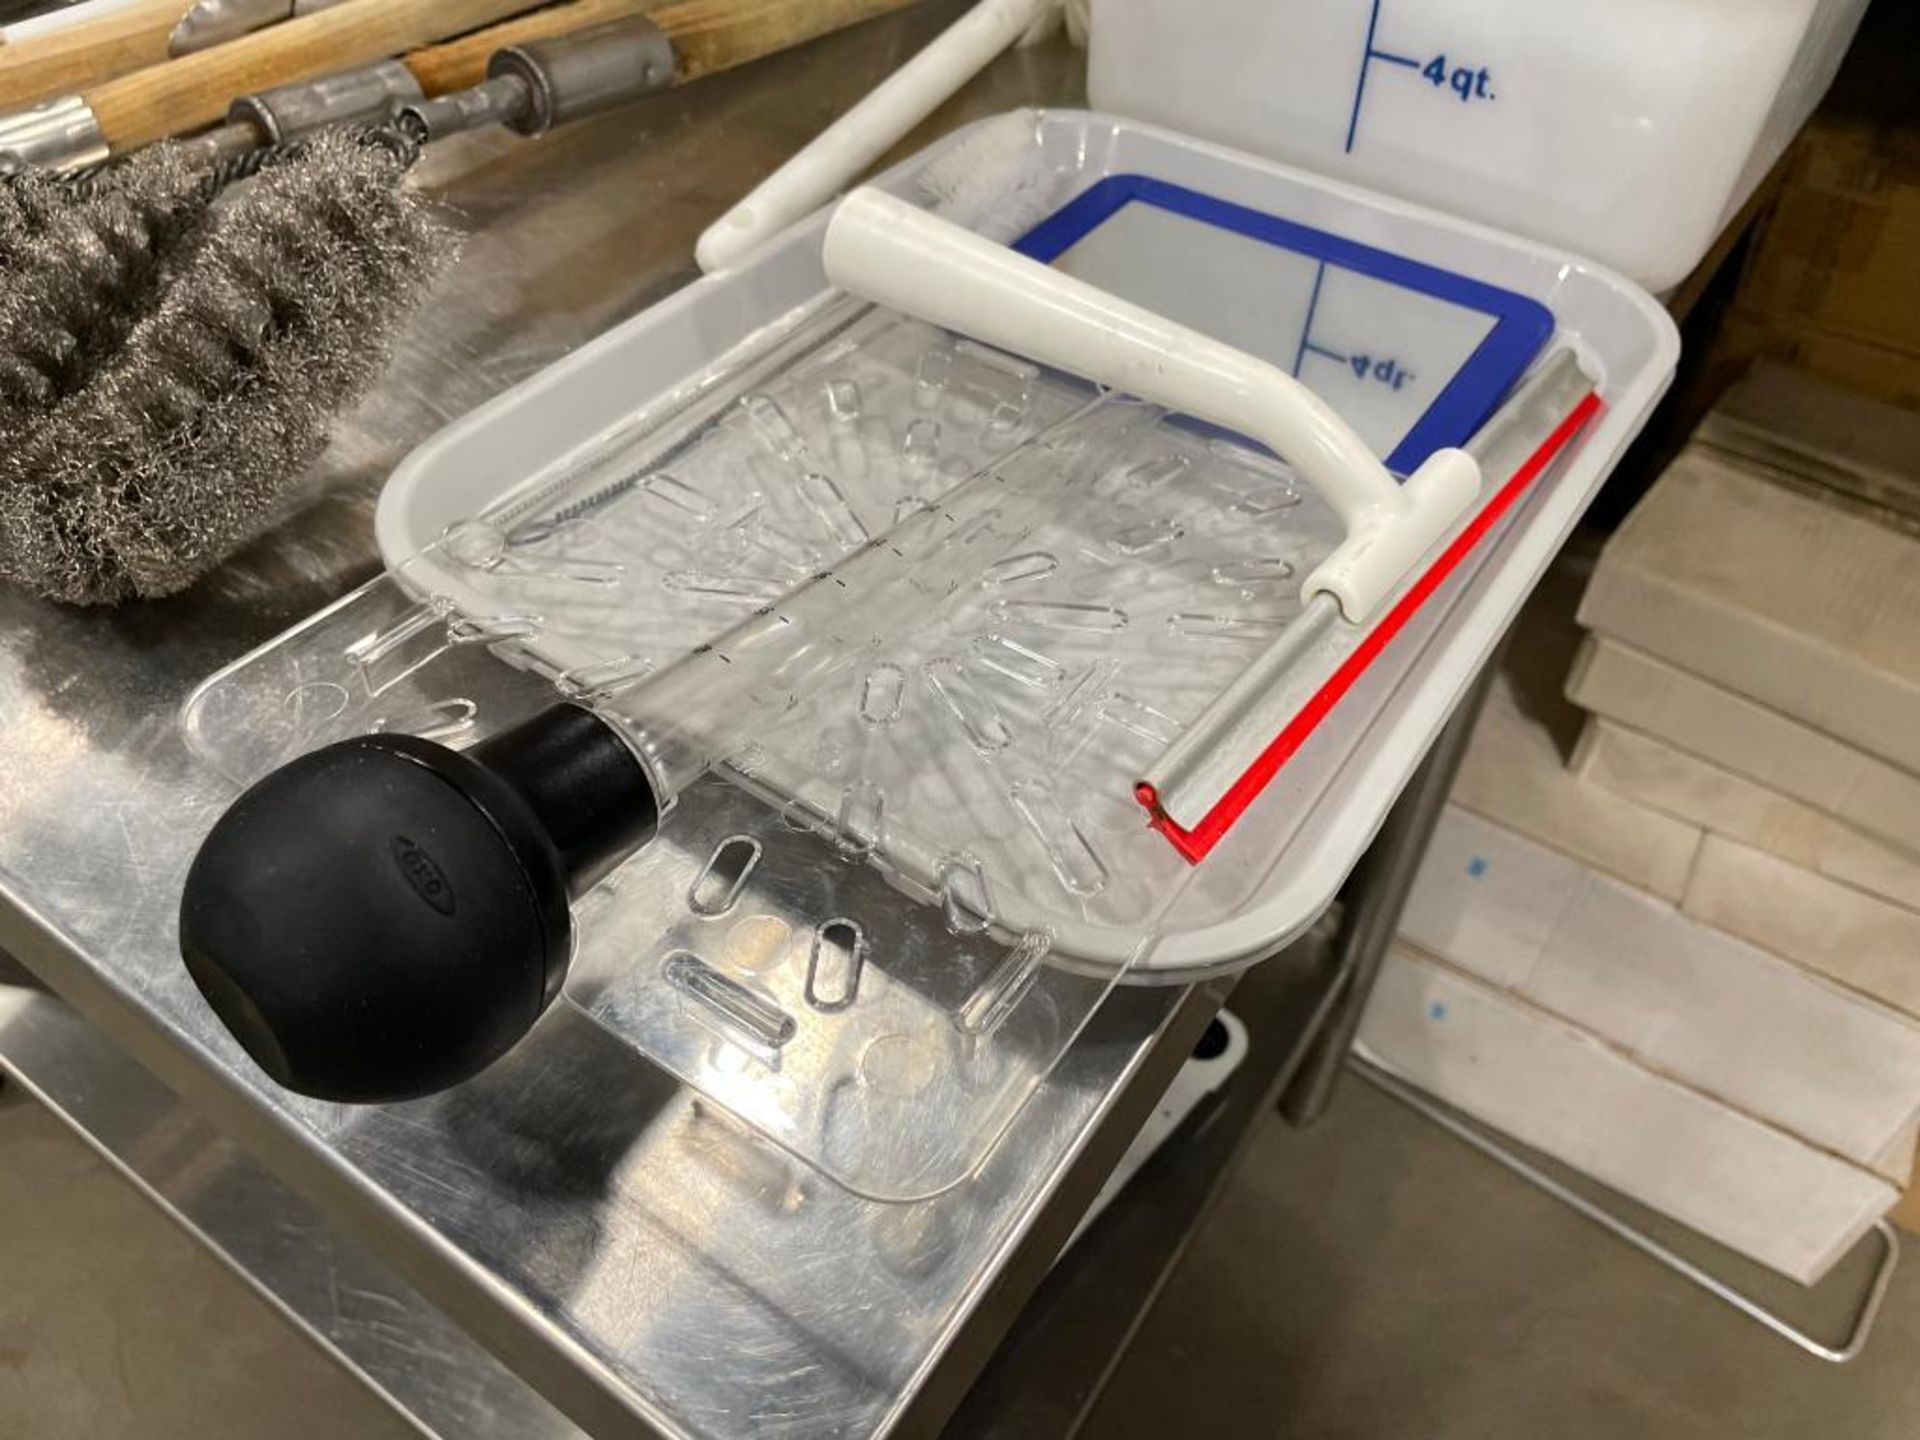 STAINLESS STEEL LADES, ICE SCOOPS, WIRE BRUSHES & FOOD STORAGE CONTAINER - Image 11 of 11